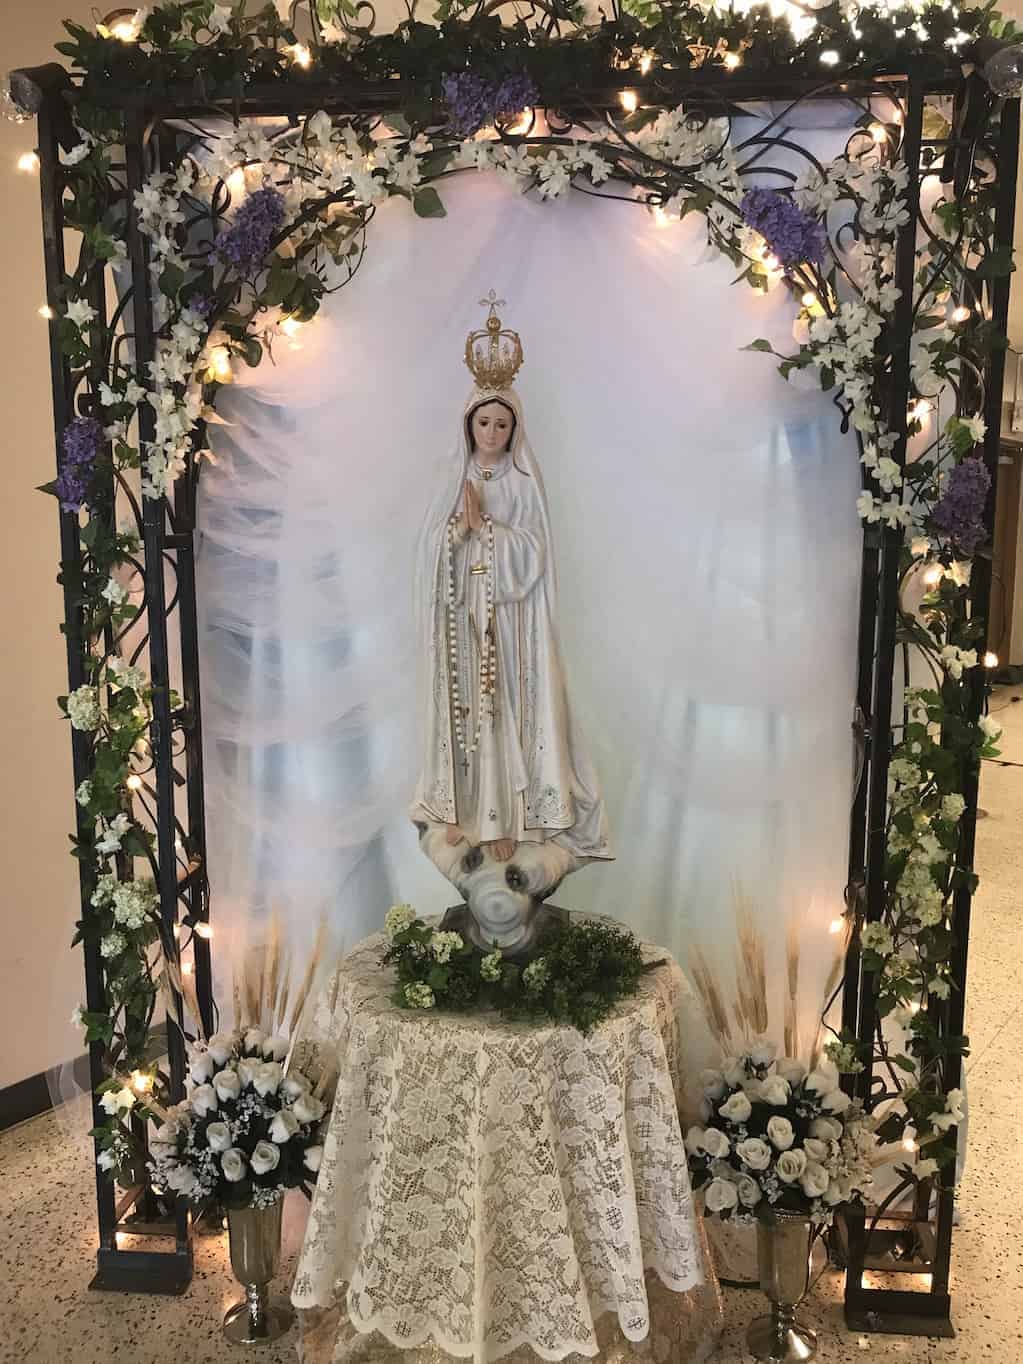 Creating a May Altar to Honor Mary